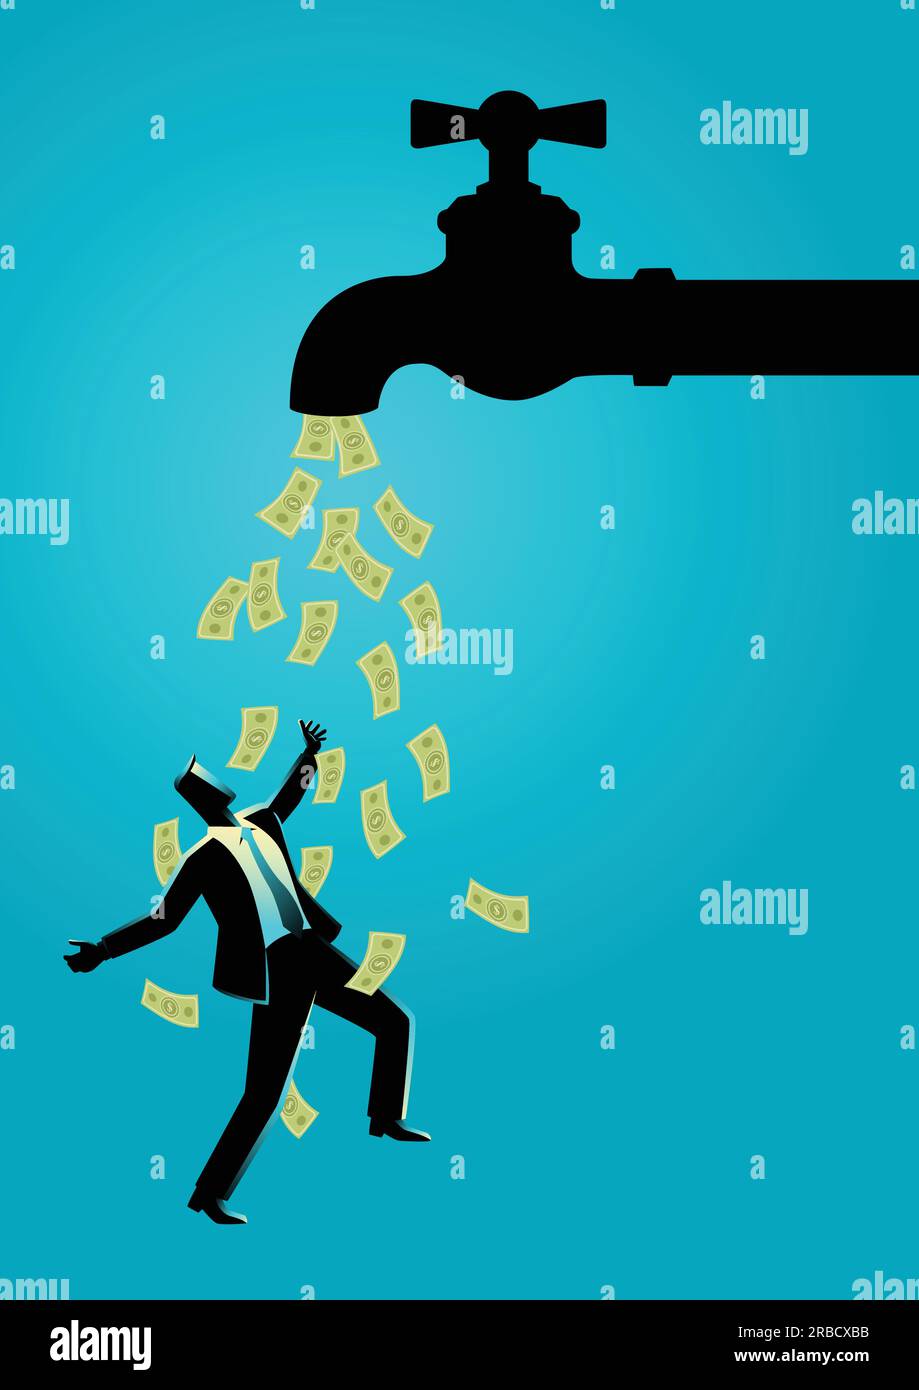 Business concept vector illustration of a businessman standing under water tap flows with banknotes Stock Vector